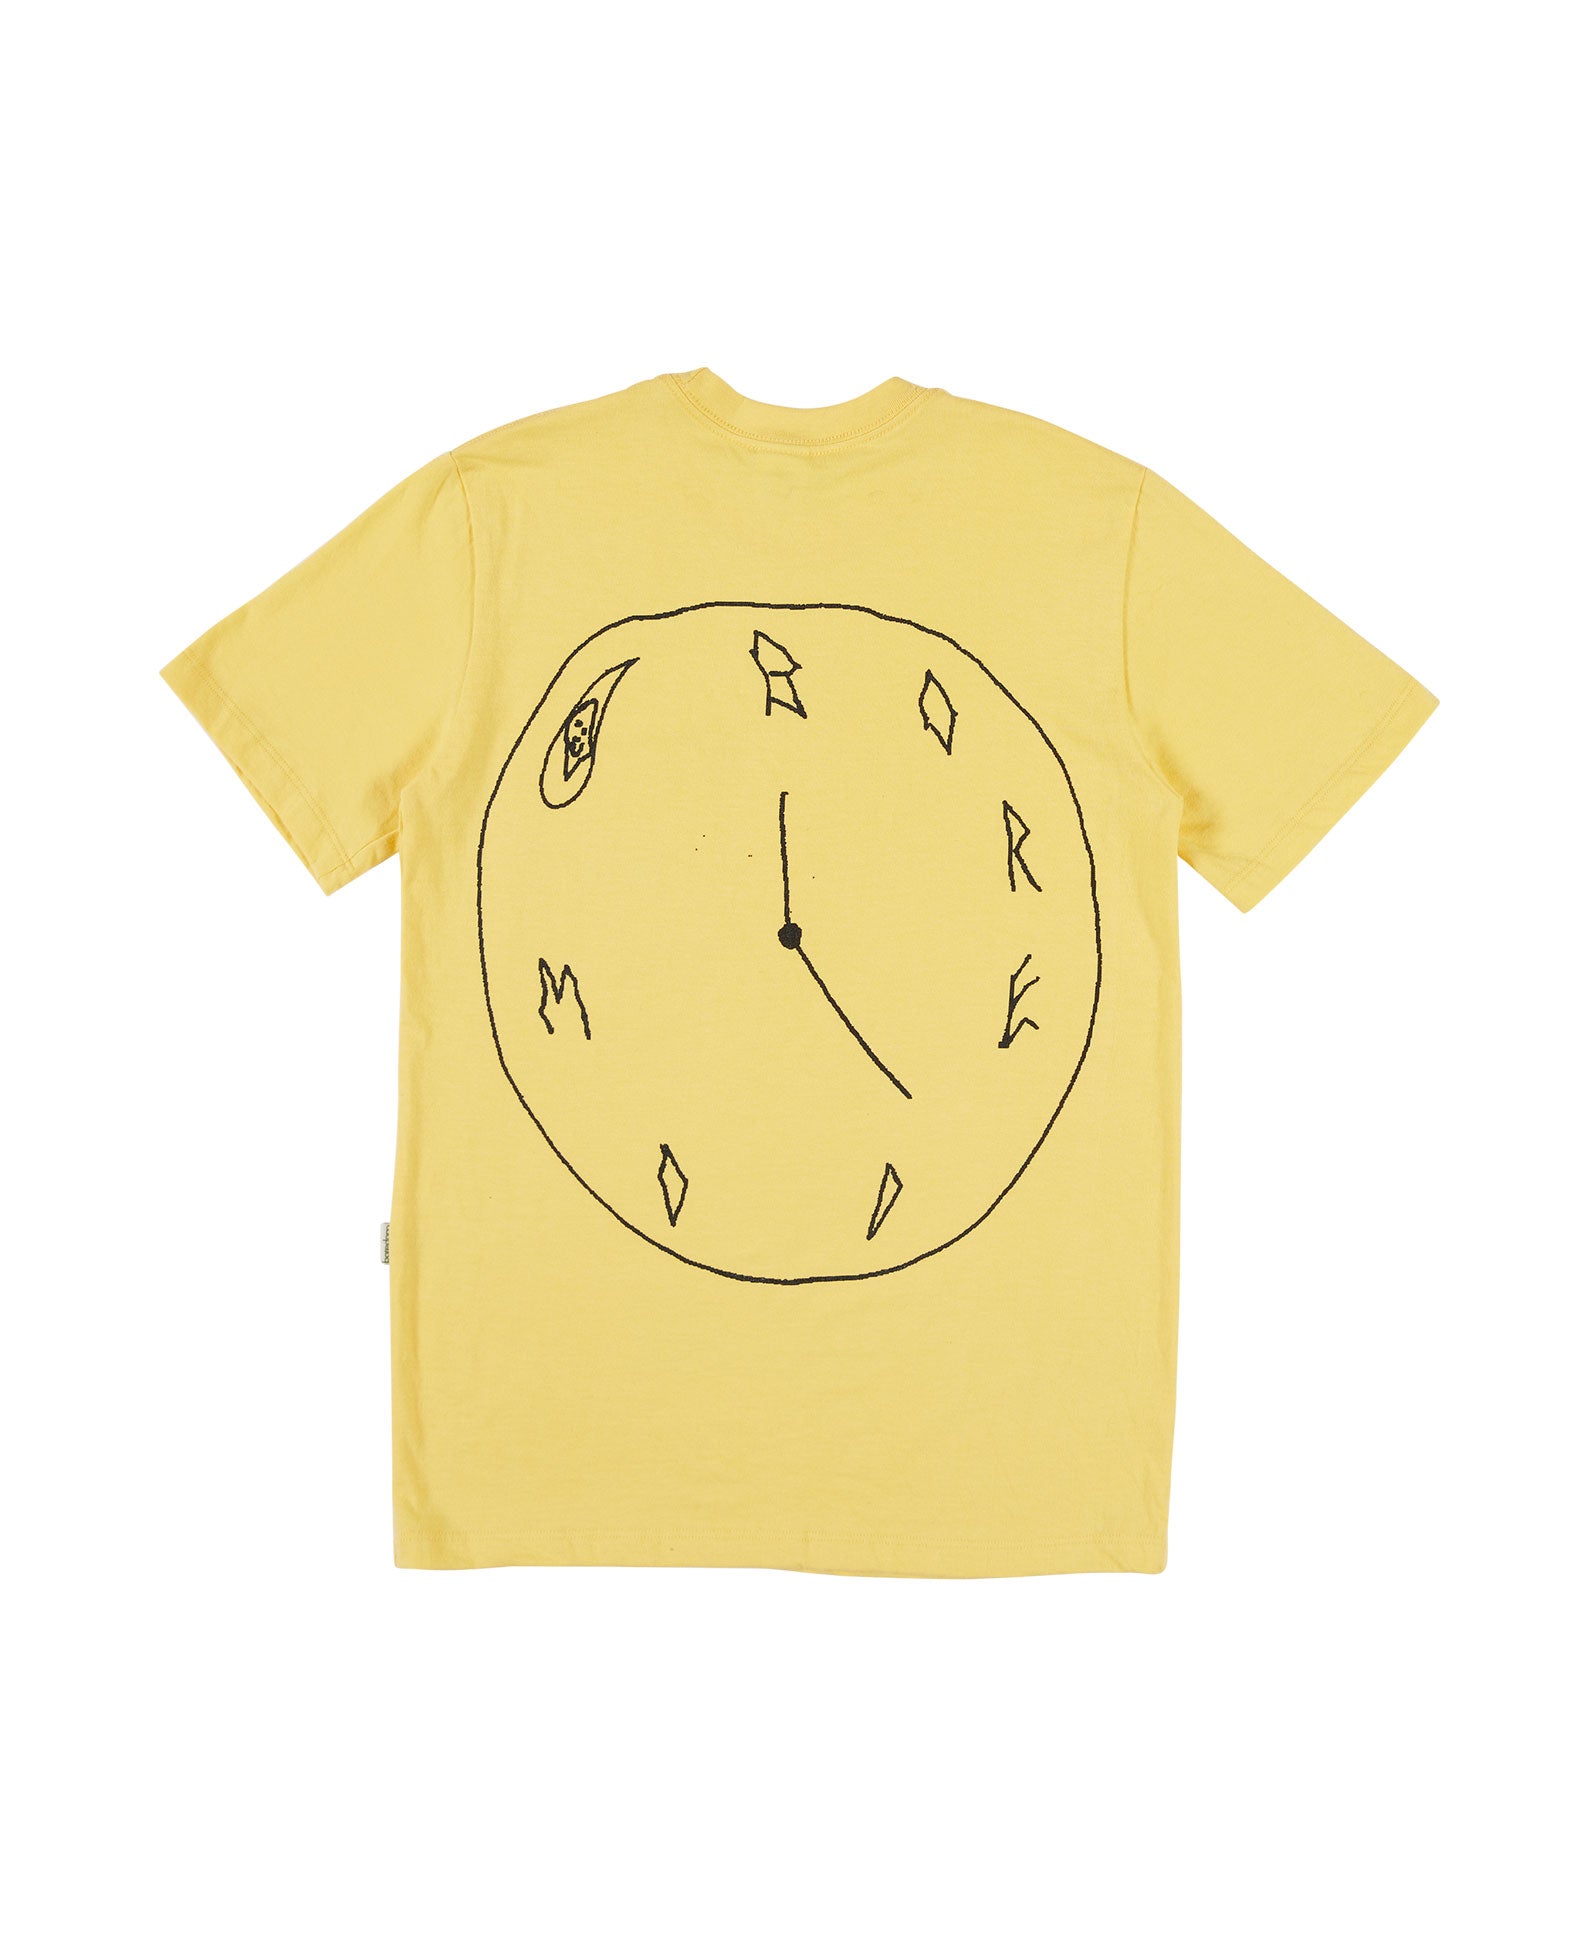 Clock Pocket T-Shirt YELLOW
Short sleeve t-shirt with a pocket on the front, screen print logo, and a full-size screen print logo to the back. 
Graphic by Canadian artist, Emmanuel Okot. 



100% GOTS Organic Cotton, milled in India 


Cut and Sewn in Canada 

202 GSM, 6.5 oz

True to size fit
 BOREDOM